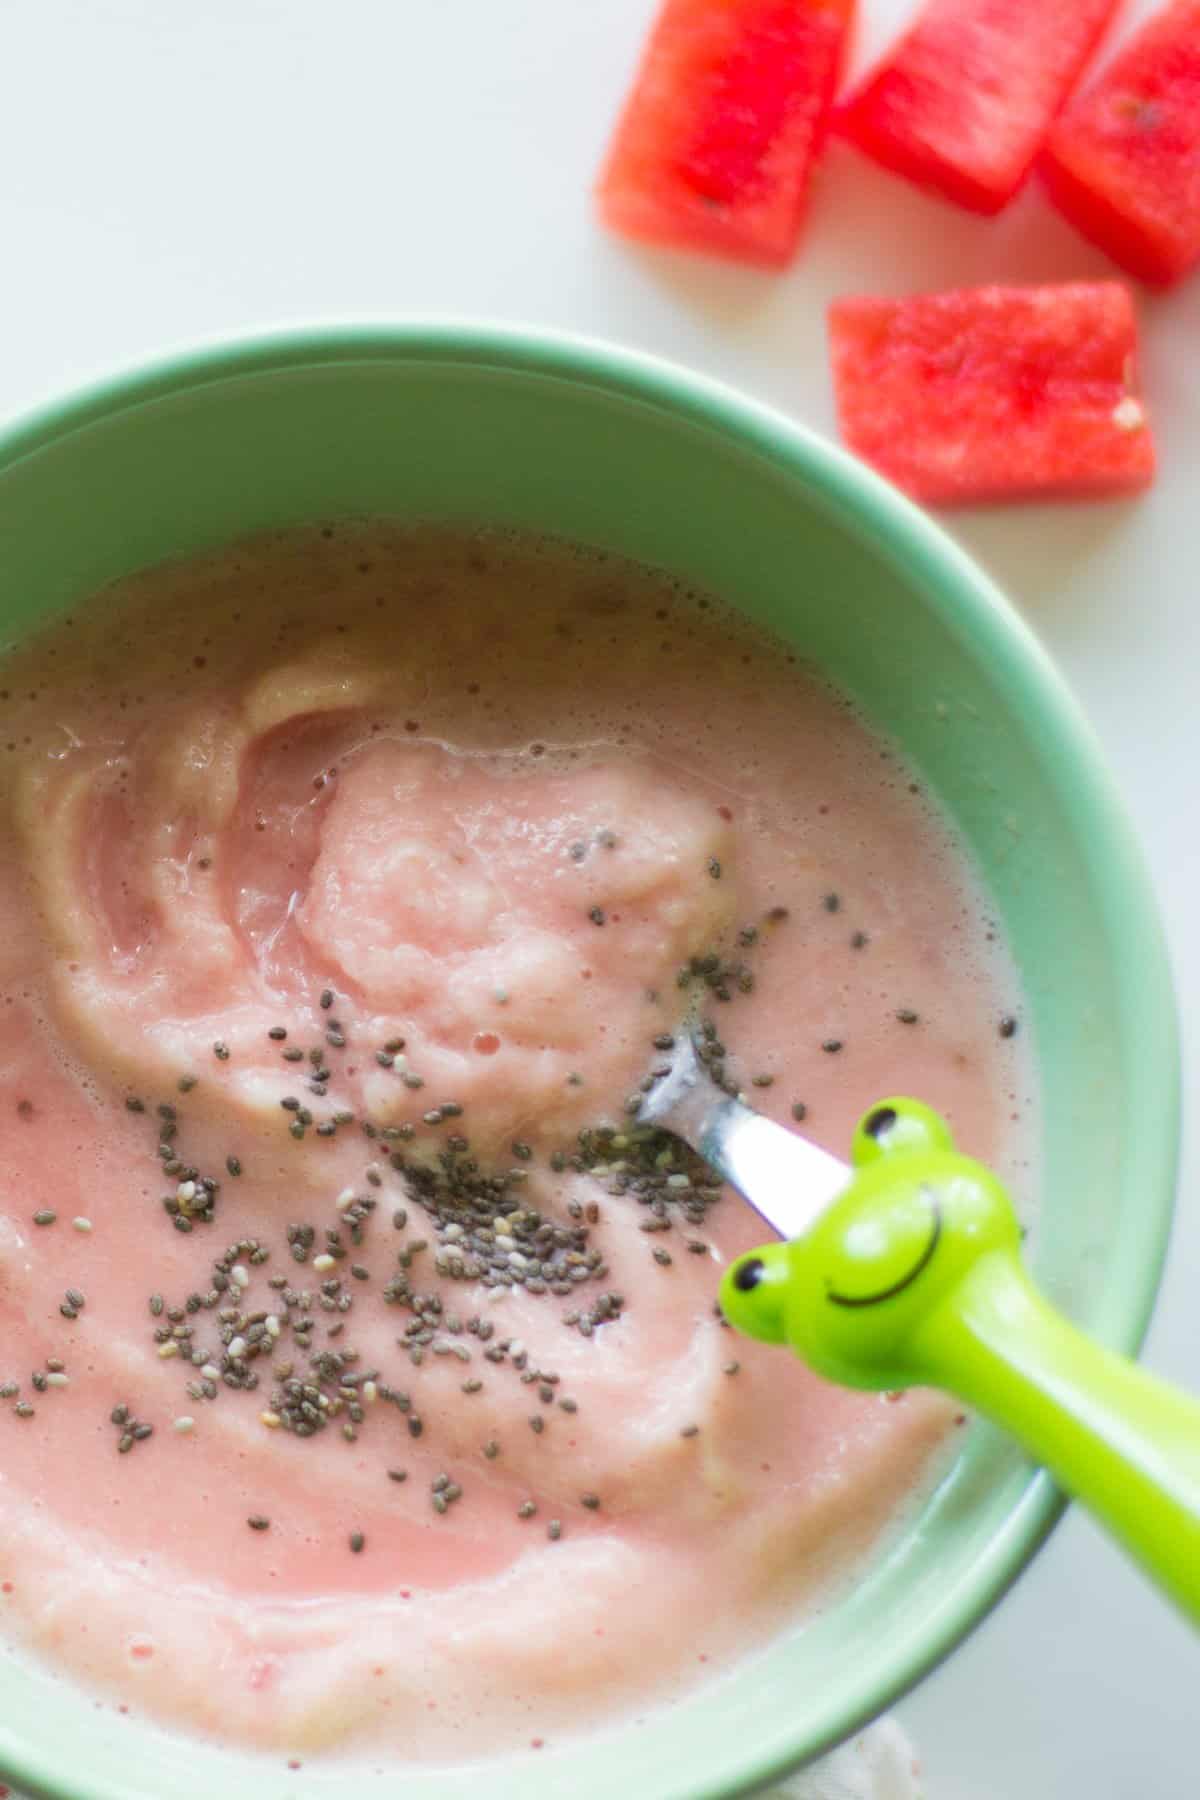 Thick smoothie served in a bowl with chia seeds.